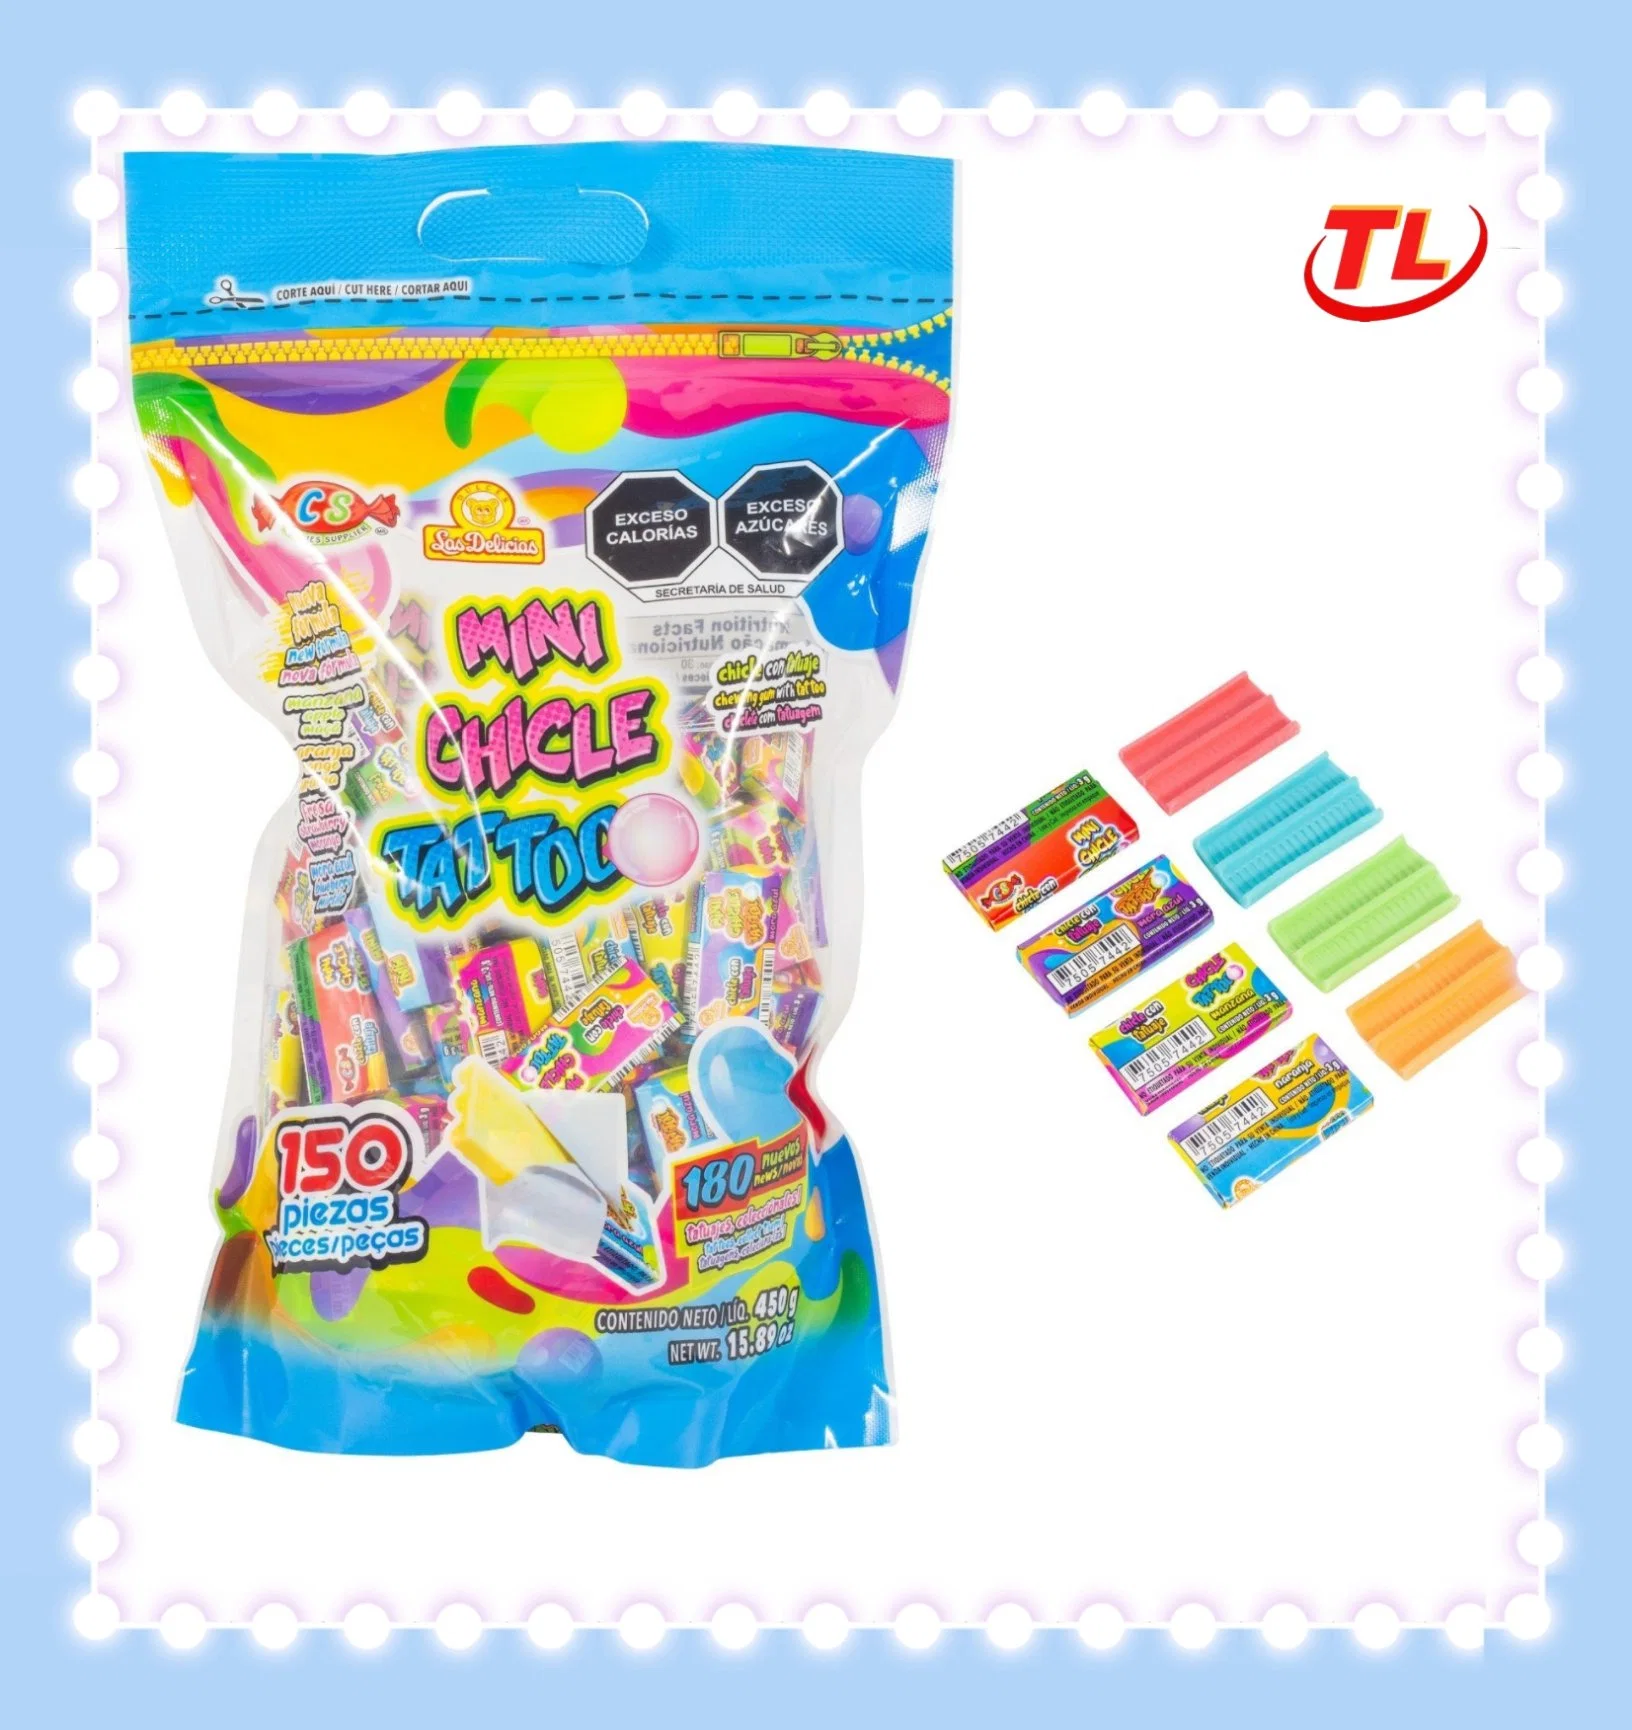 Delicious Taste Good-Looking Chewing Tattoo Bubble Gum Candy for Party